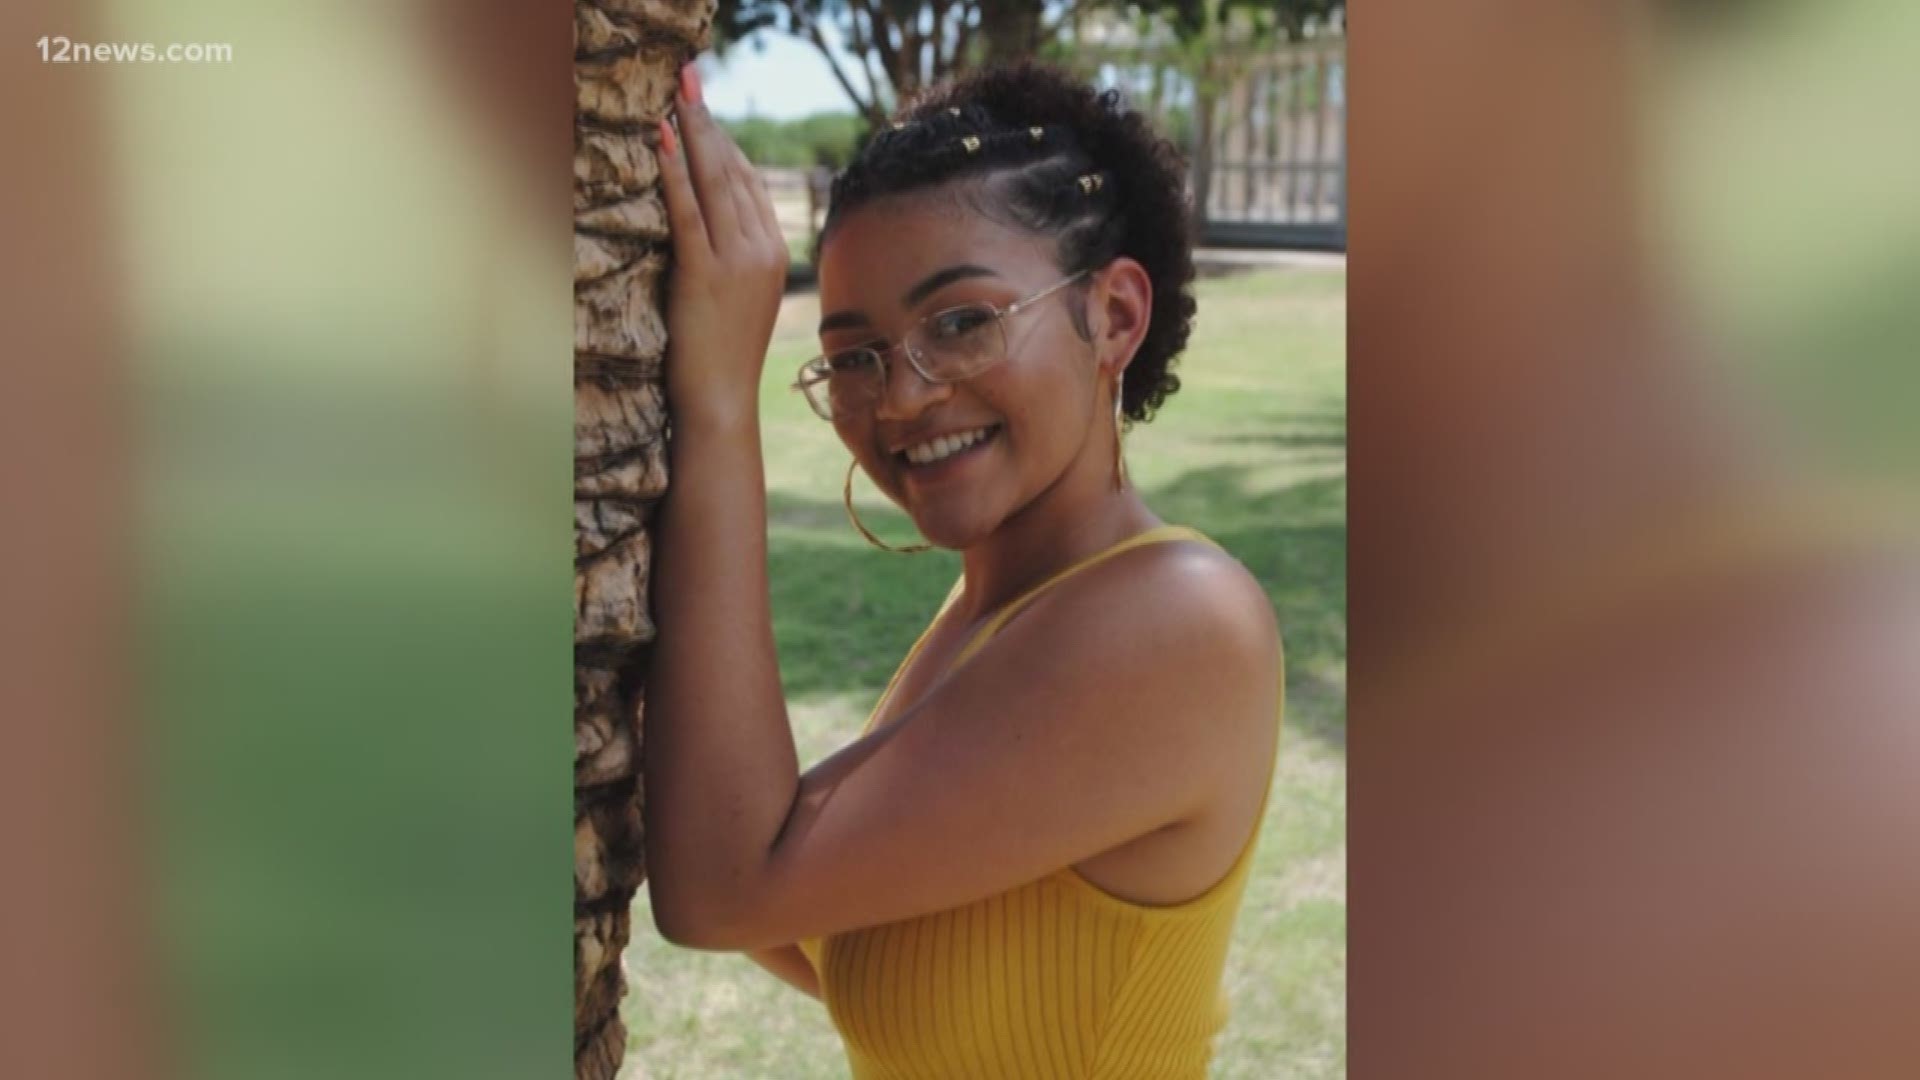 Kiera Bergman has been missing since she left her job early on Saturday. Her purse, wallet and keys were left behind, and her family is asking anyone with any information to please come forward.